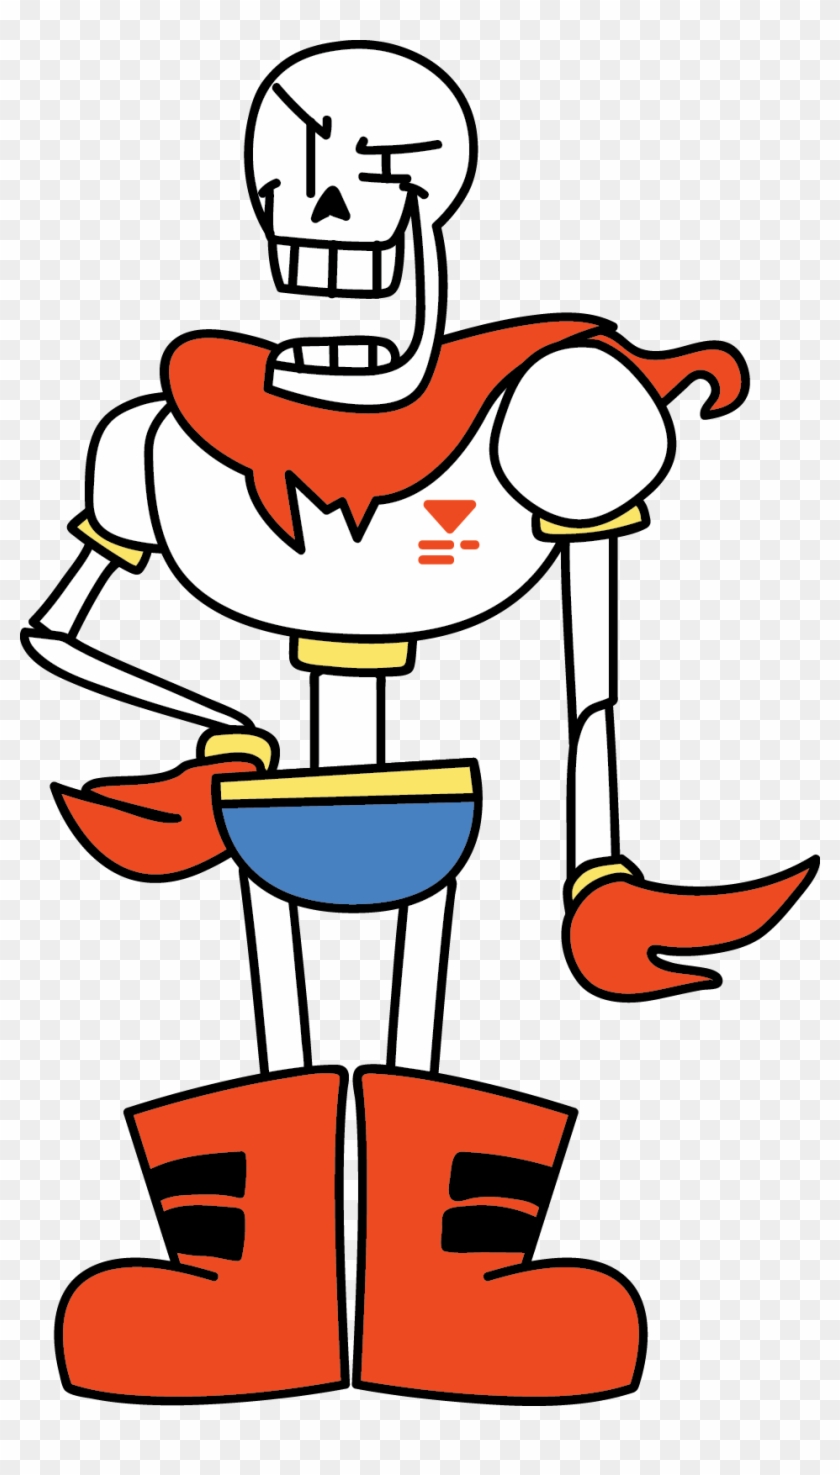 5 Kbyte, V - Papyrus From Undertale Clipart #2658822